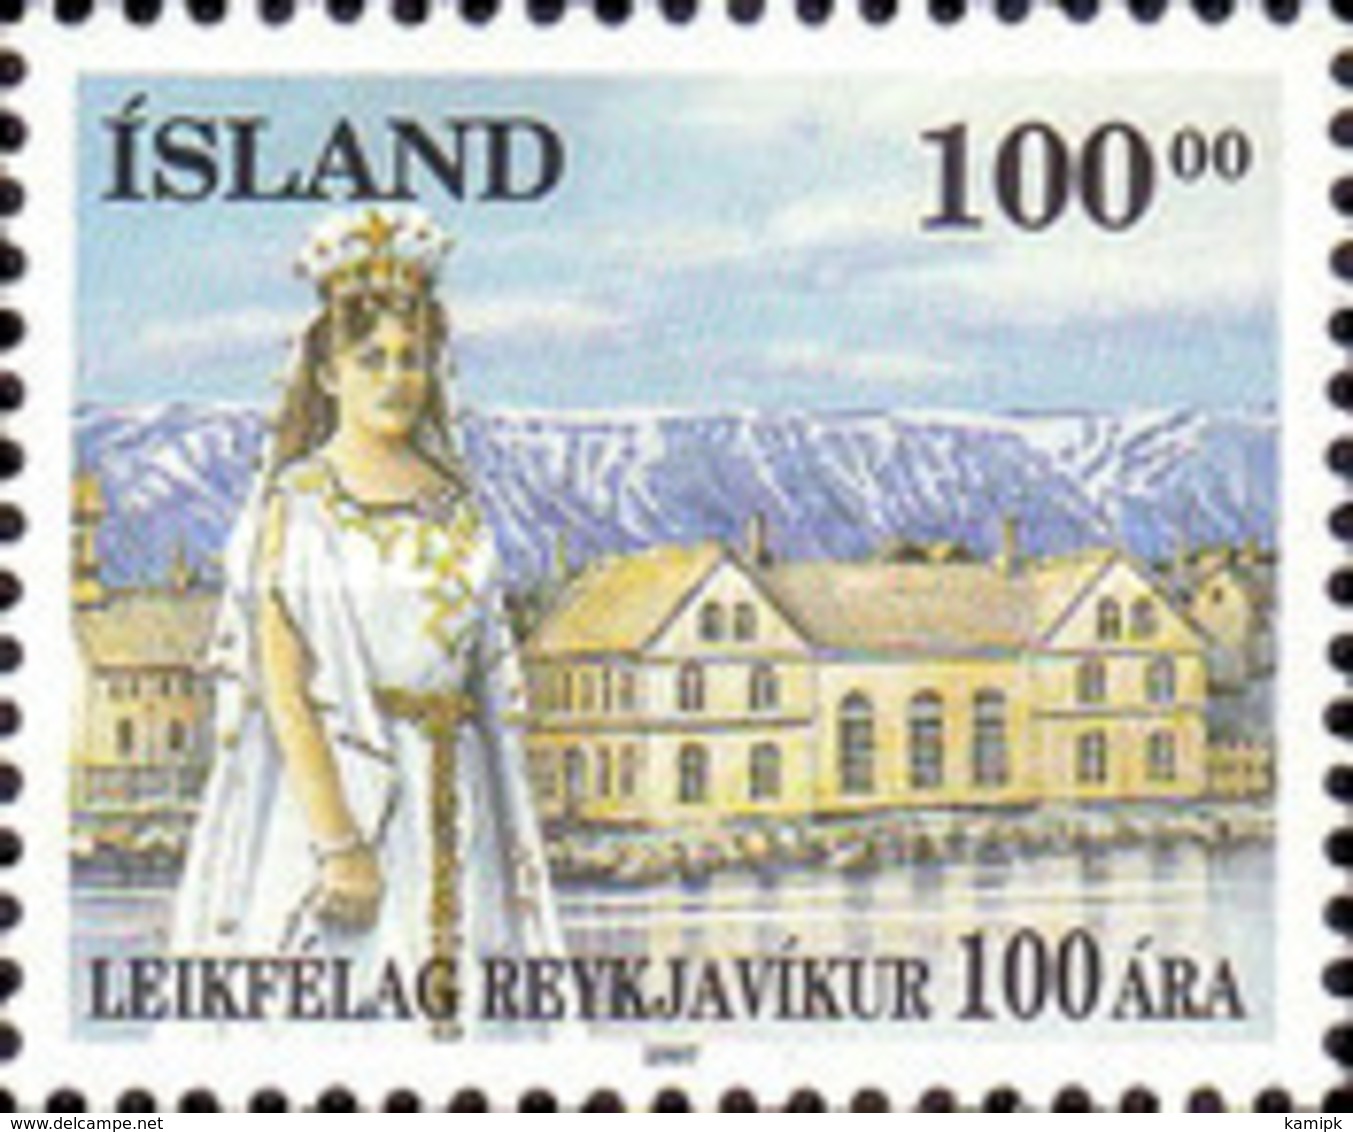 USED STAMPS  Iceland - The 100th Anniversary Of The Reykjavik T...	 - 1997 - Used Stamps